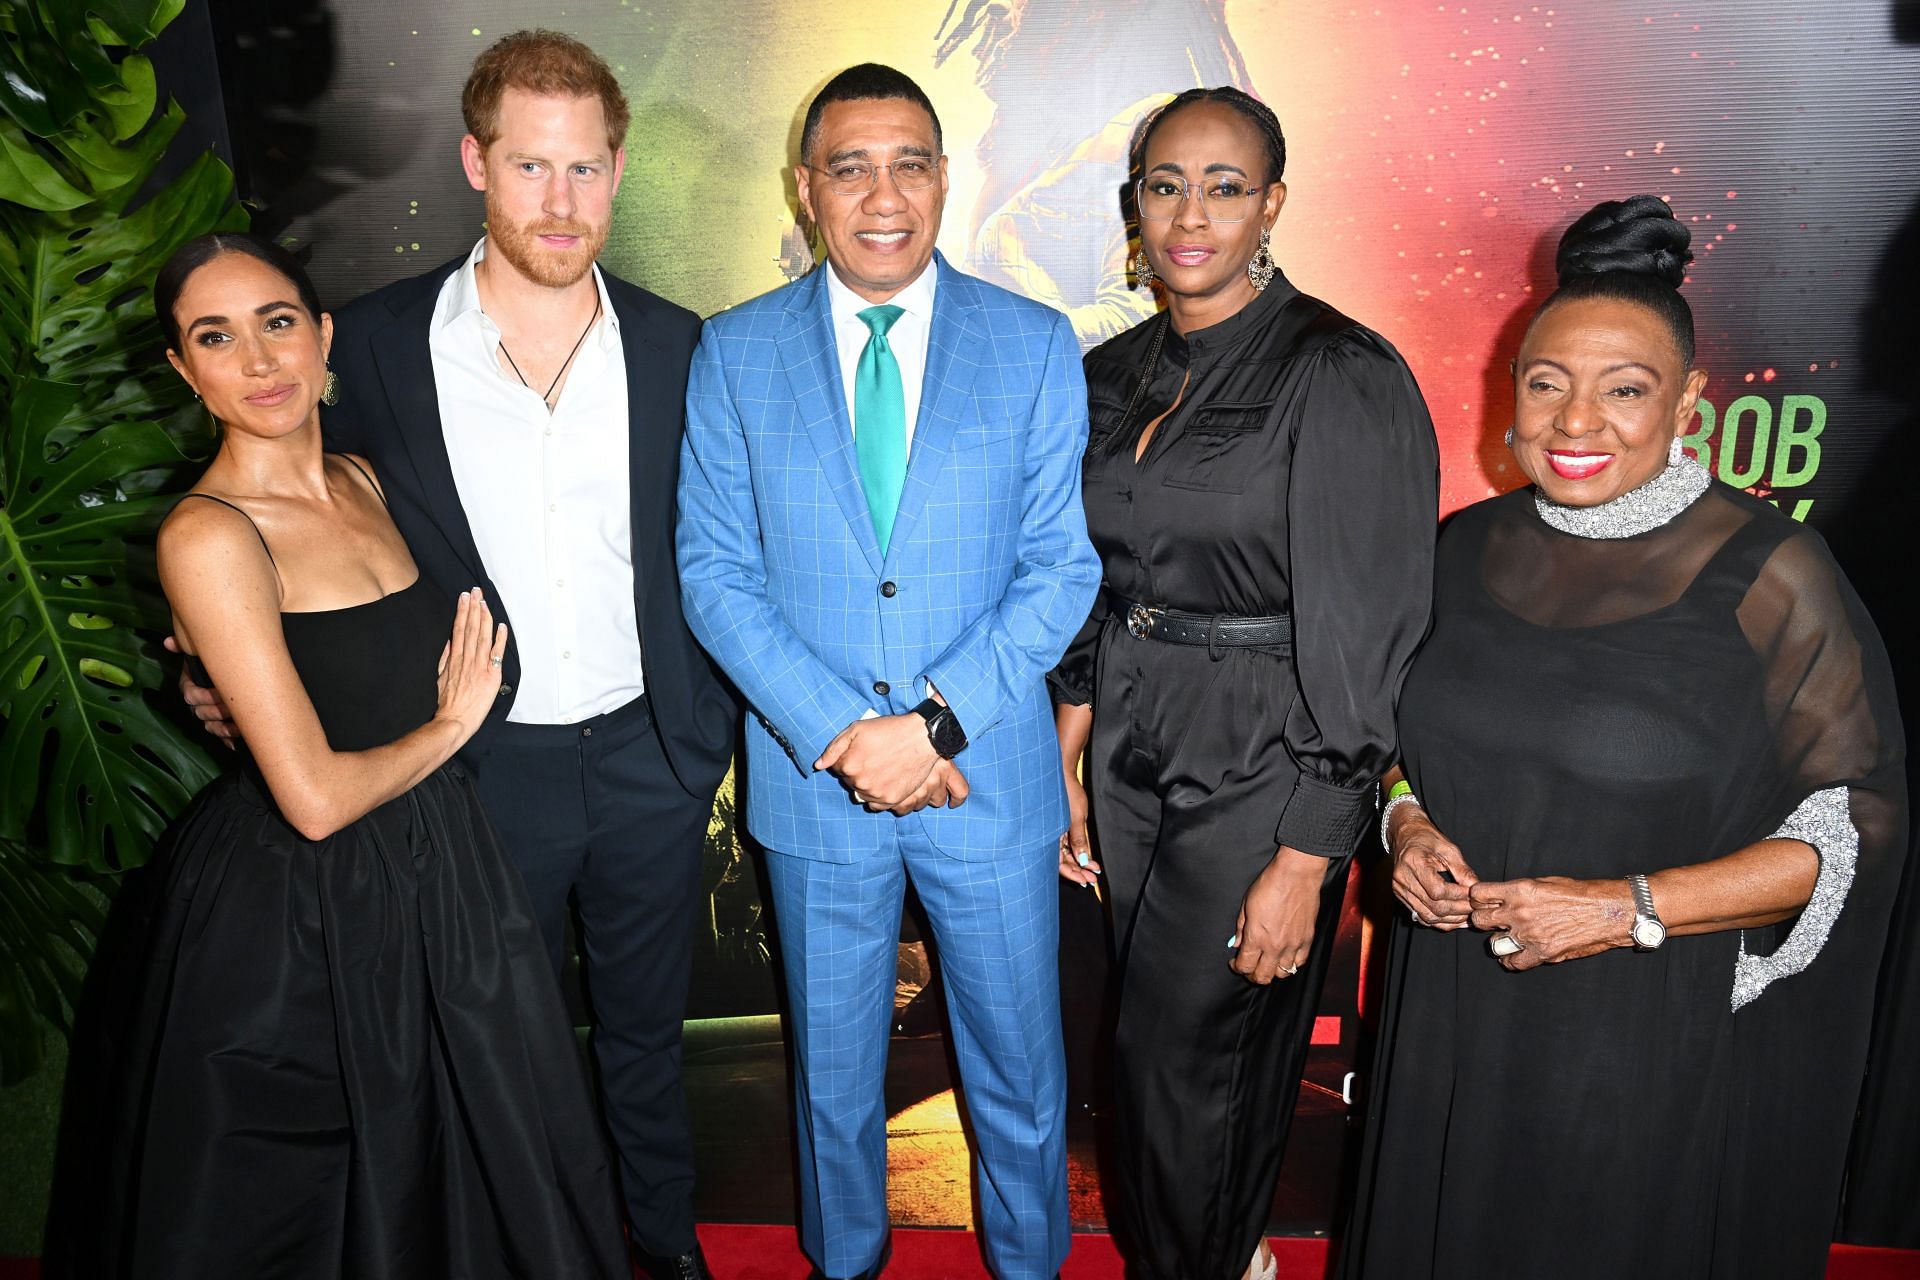 Meghan Markle and Prince Harry at &ldquo;Bob Marley: One Love&rdquo; Premiere event in Jamaica (Image via Getty)